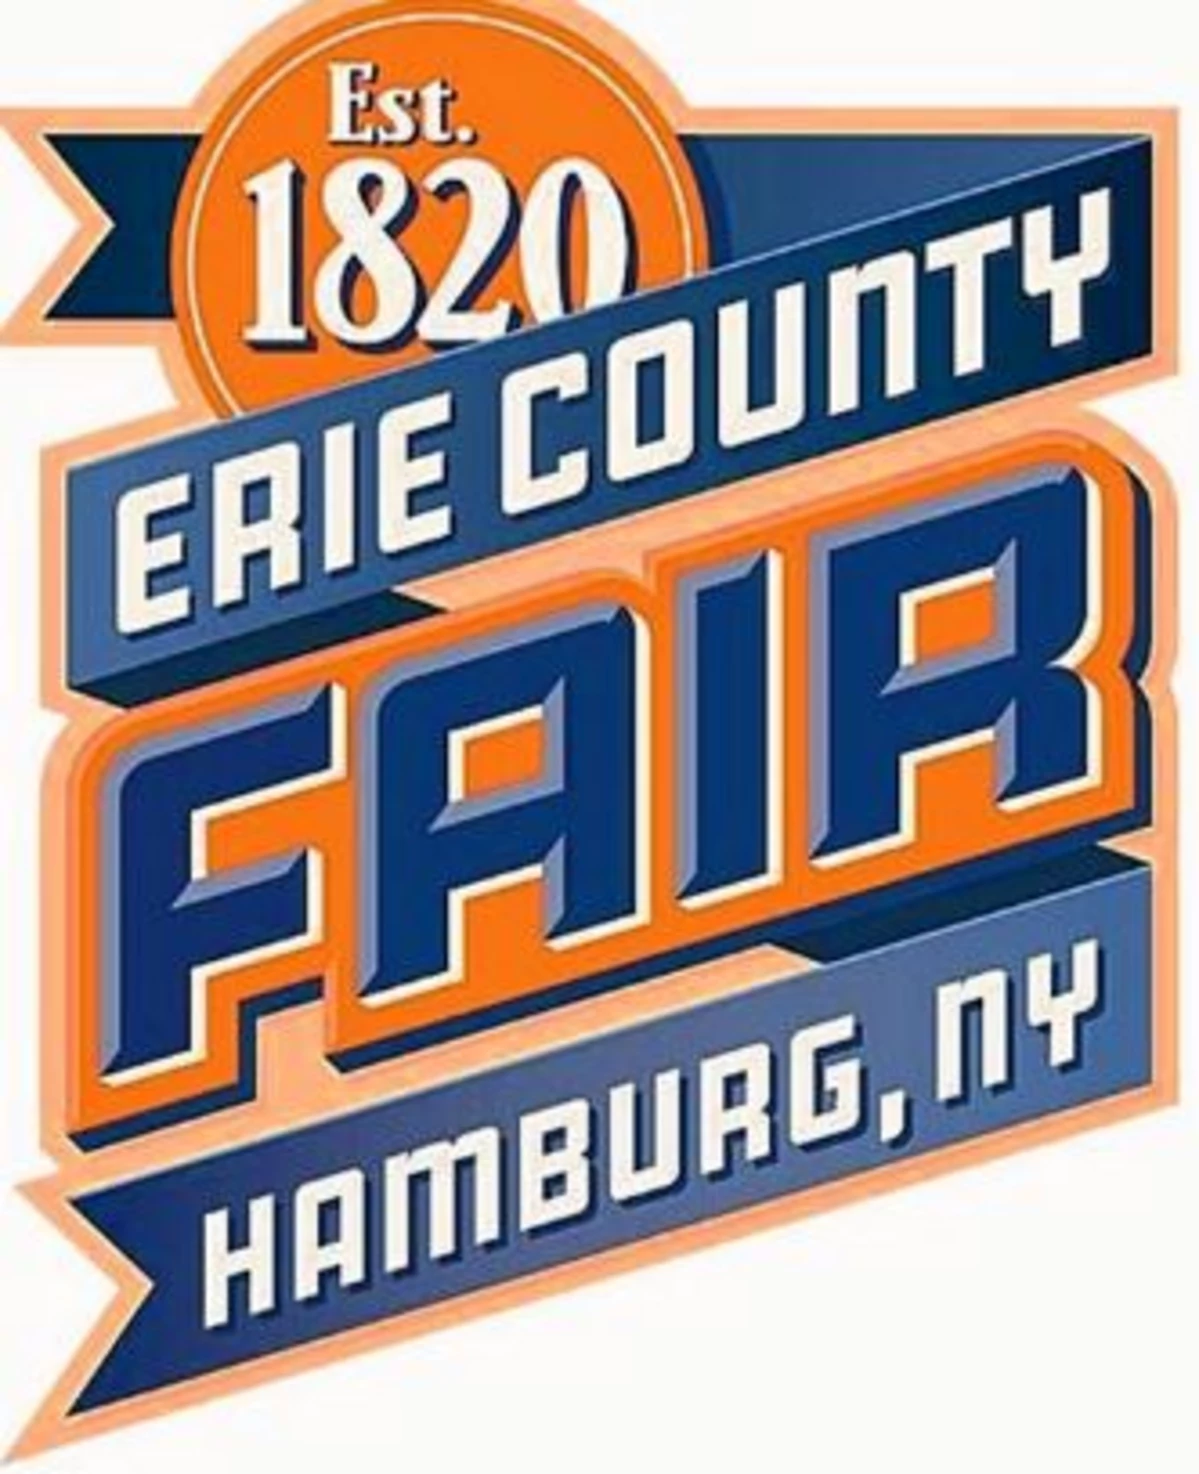 Erie County Fair Concerts AnnouncedWho Is Coming? Tickets + Prices [LIST]